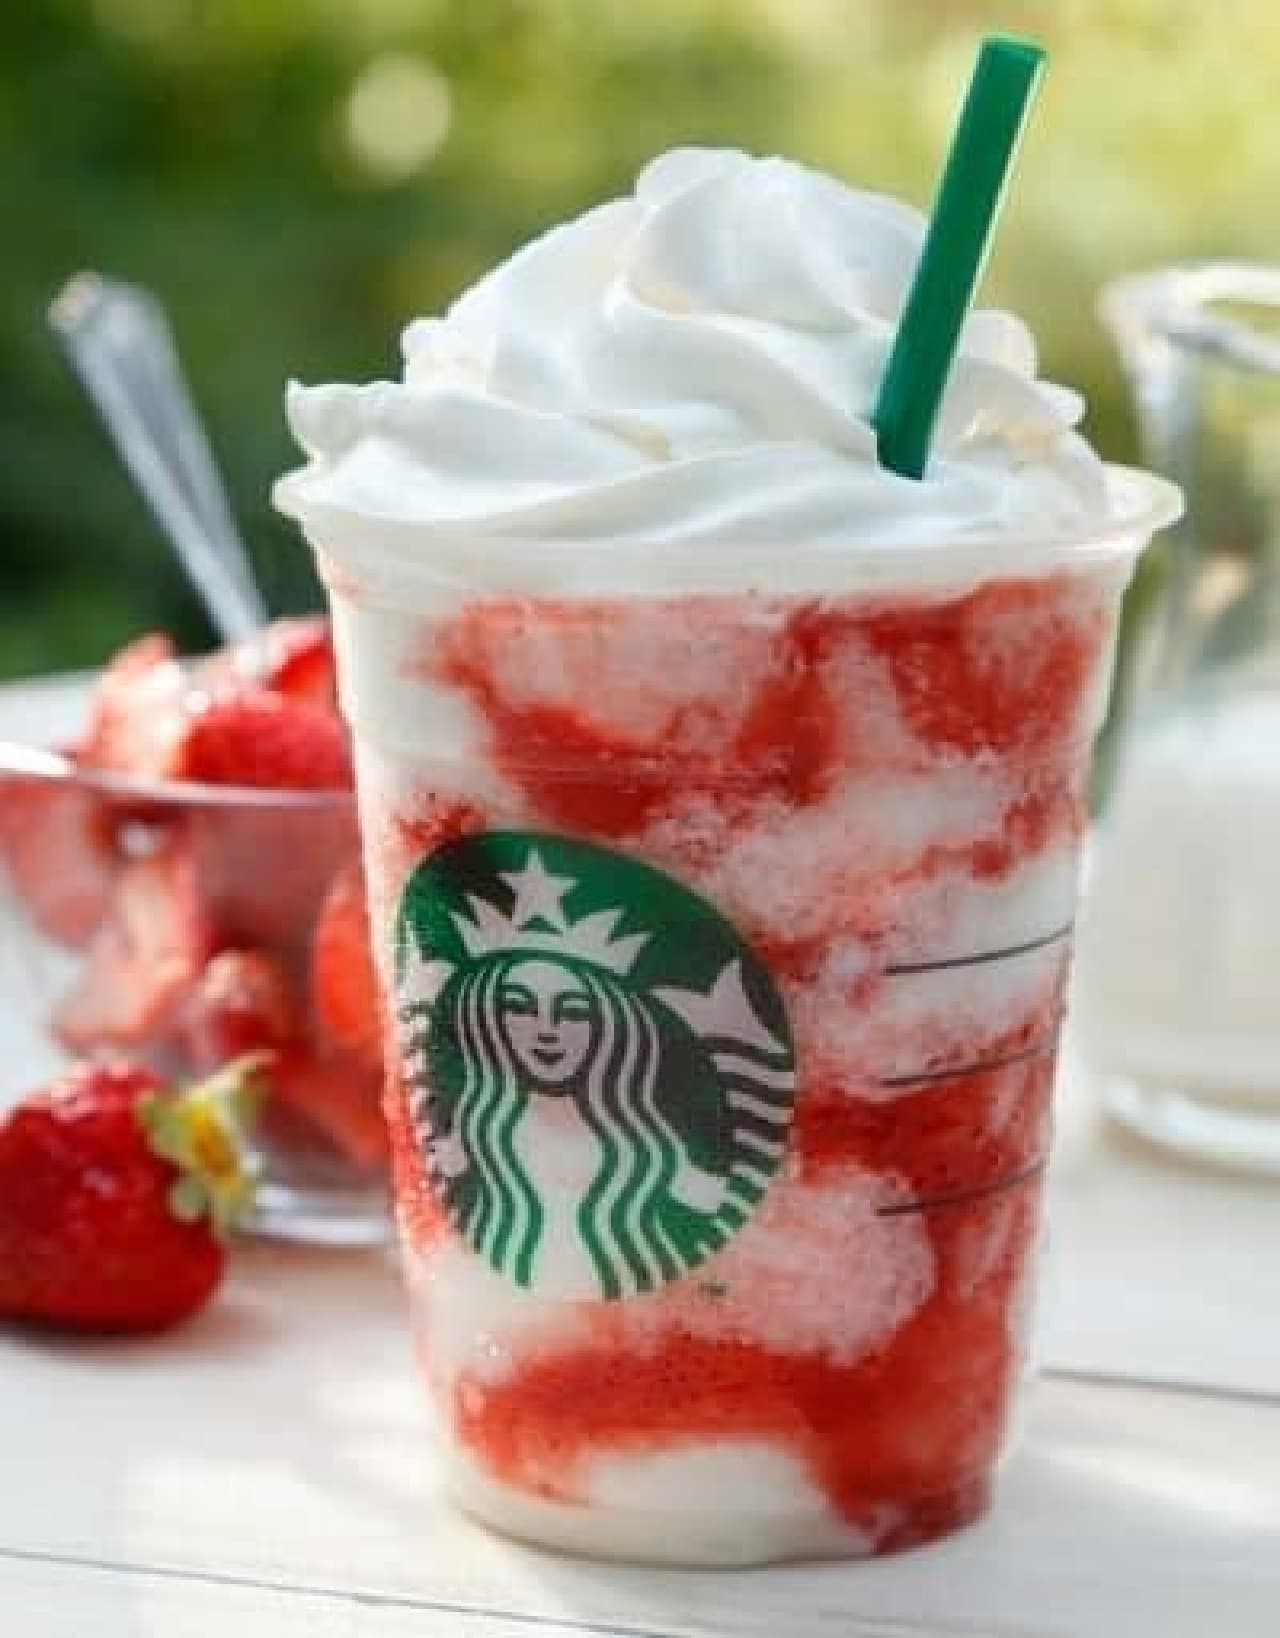 More fruity this year! Strawberry frappe with a gorgeous contrast of red and white